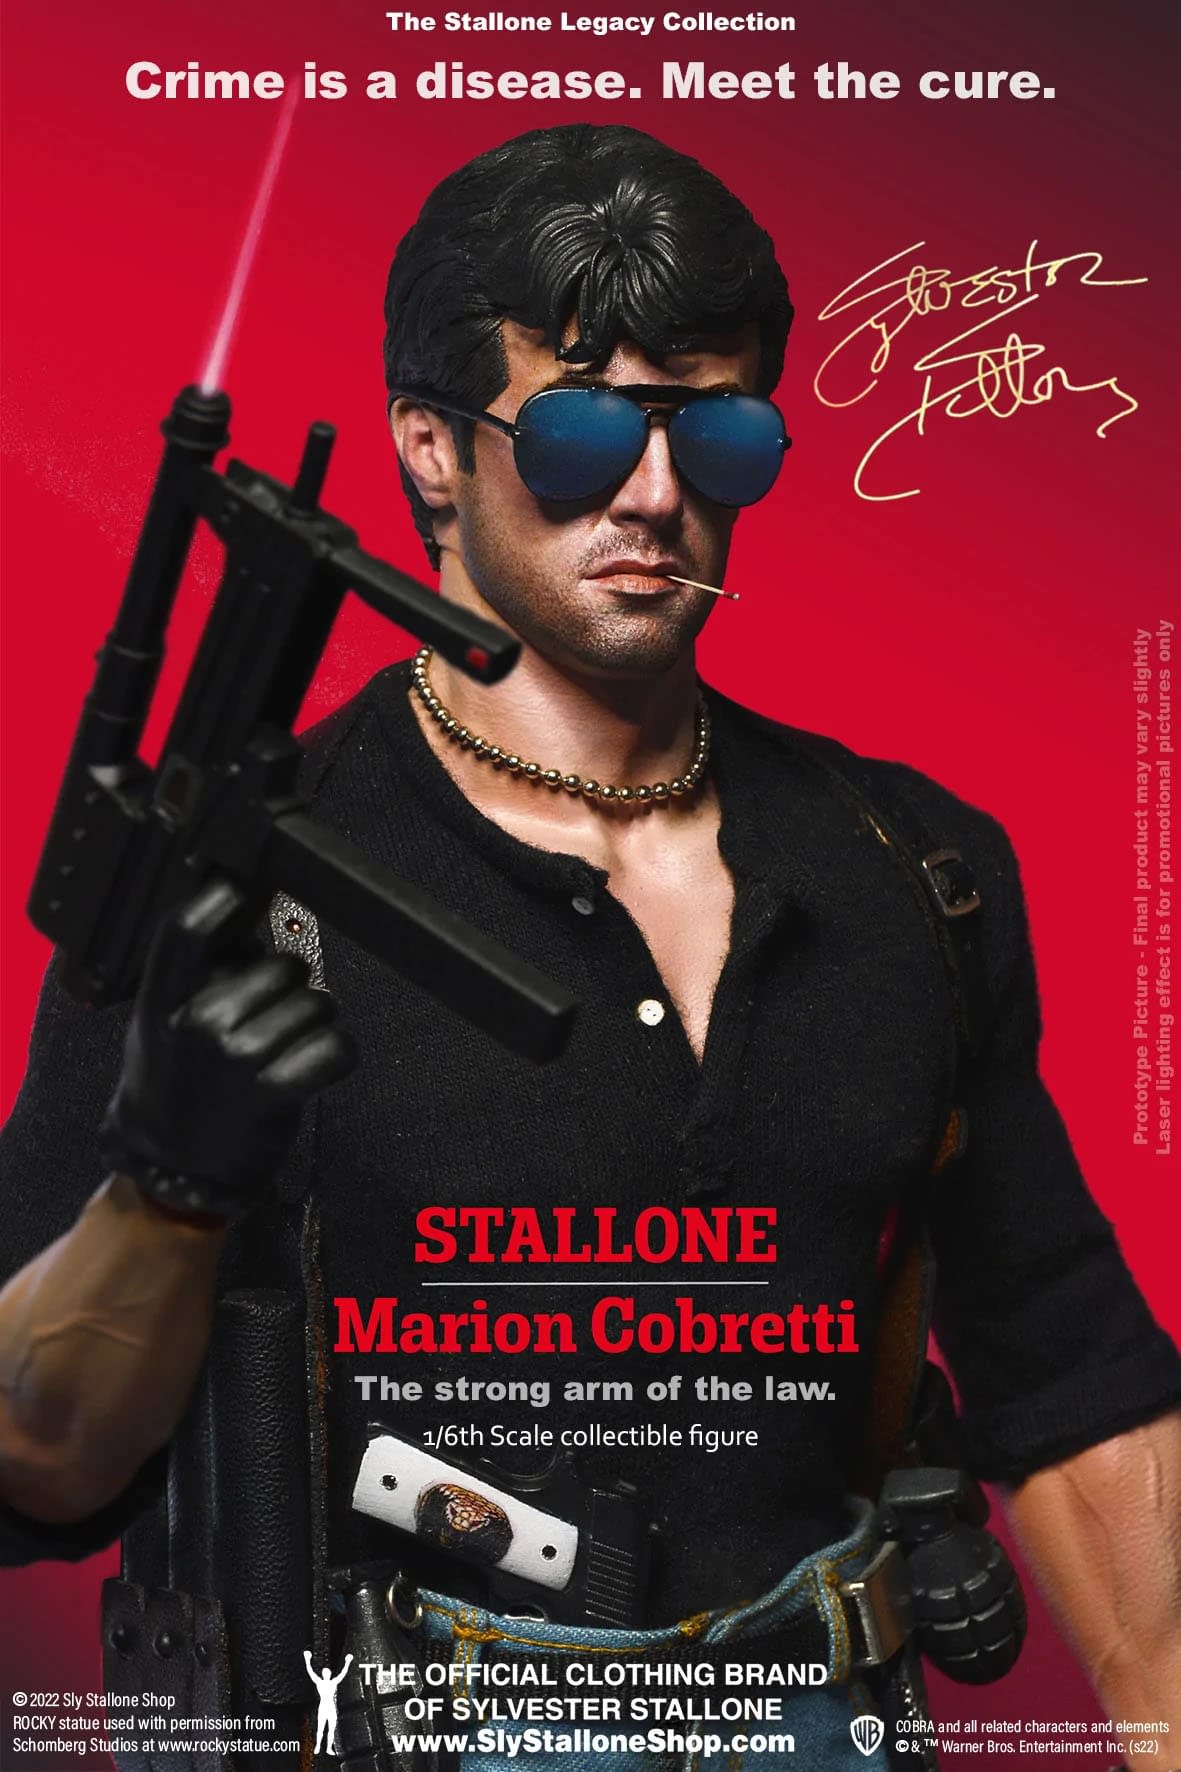 Sylvester Stallone: The Legacy Collection Cobra (1986) Figure Revealed